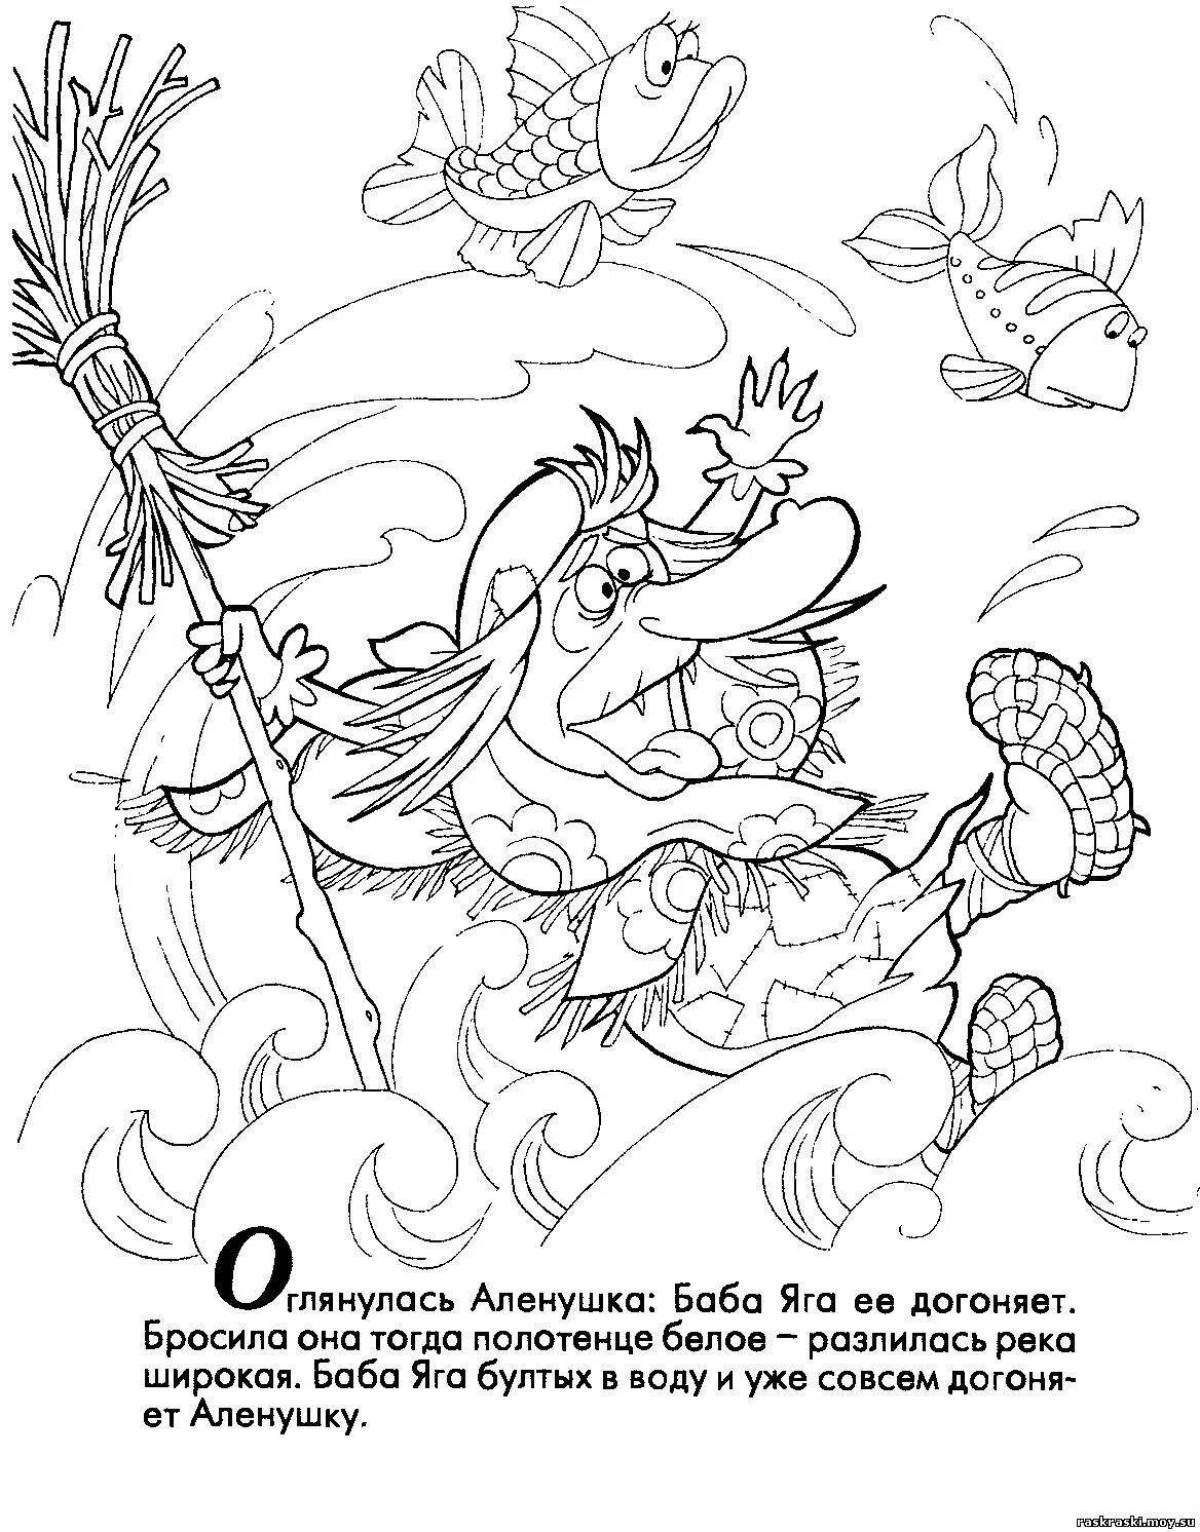 Exquisite coloring book based on Pushkin's fairy tales